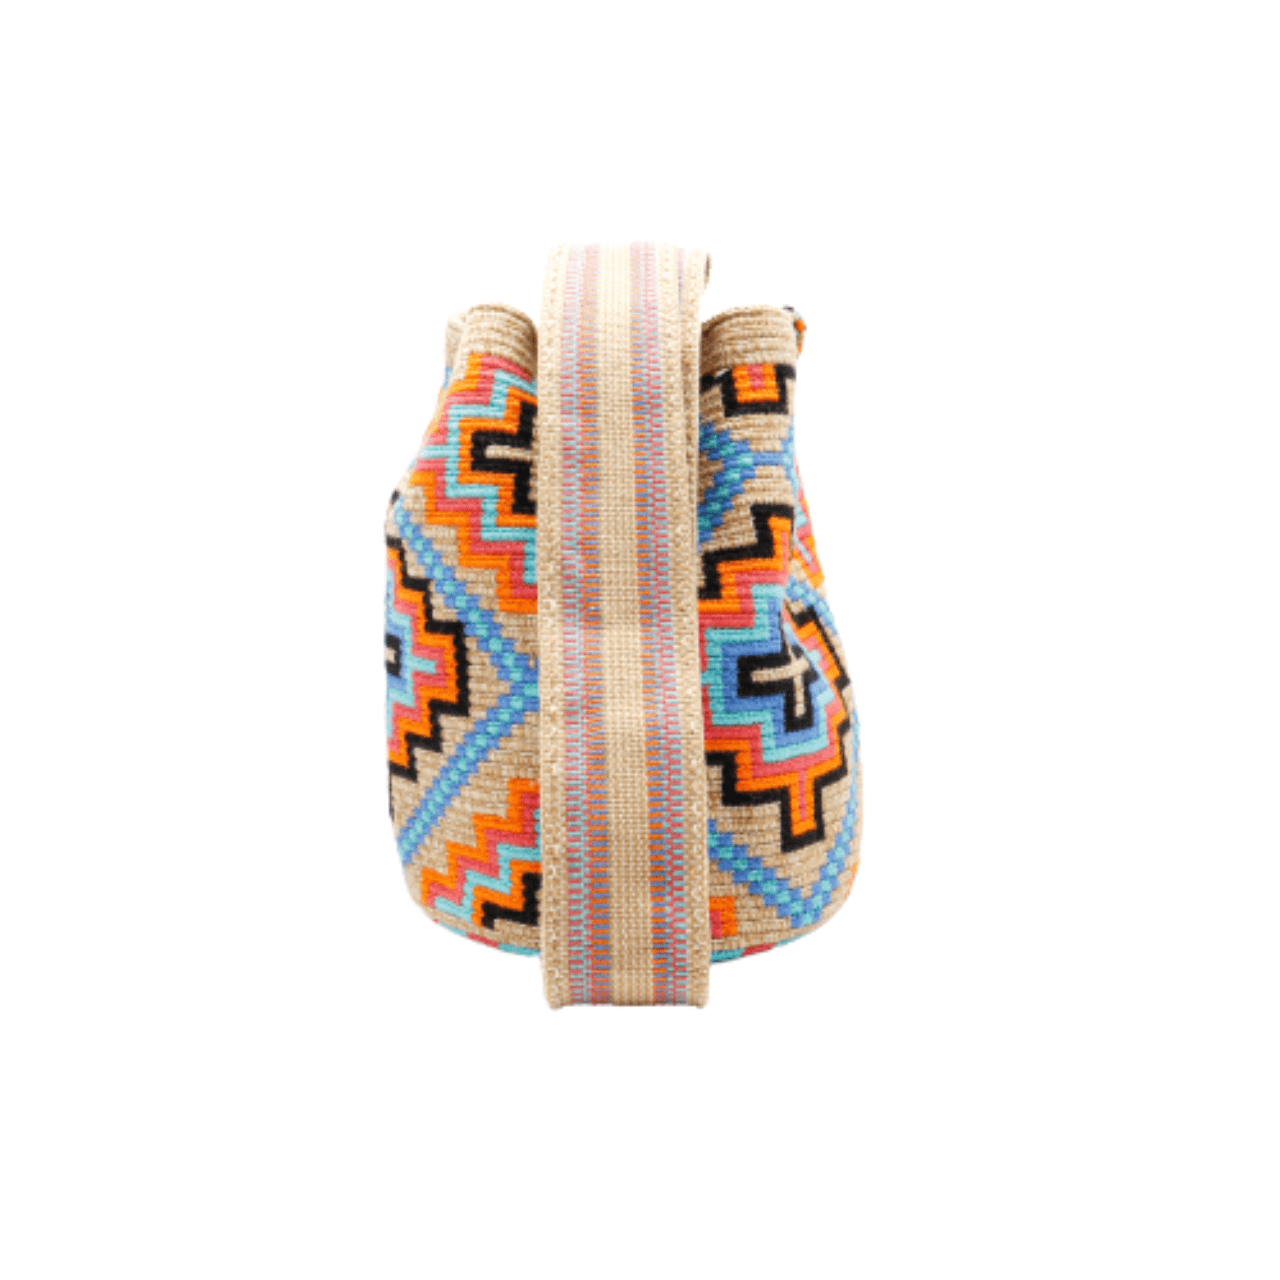 Clover Wayuu Bag in Warm Colors - Handmade Artisan Craftsmanship - Unique Piece of Art Symbolizing Strength, Love, and Commitment